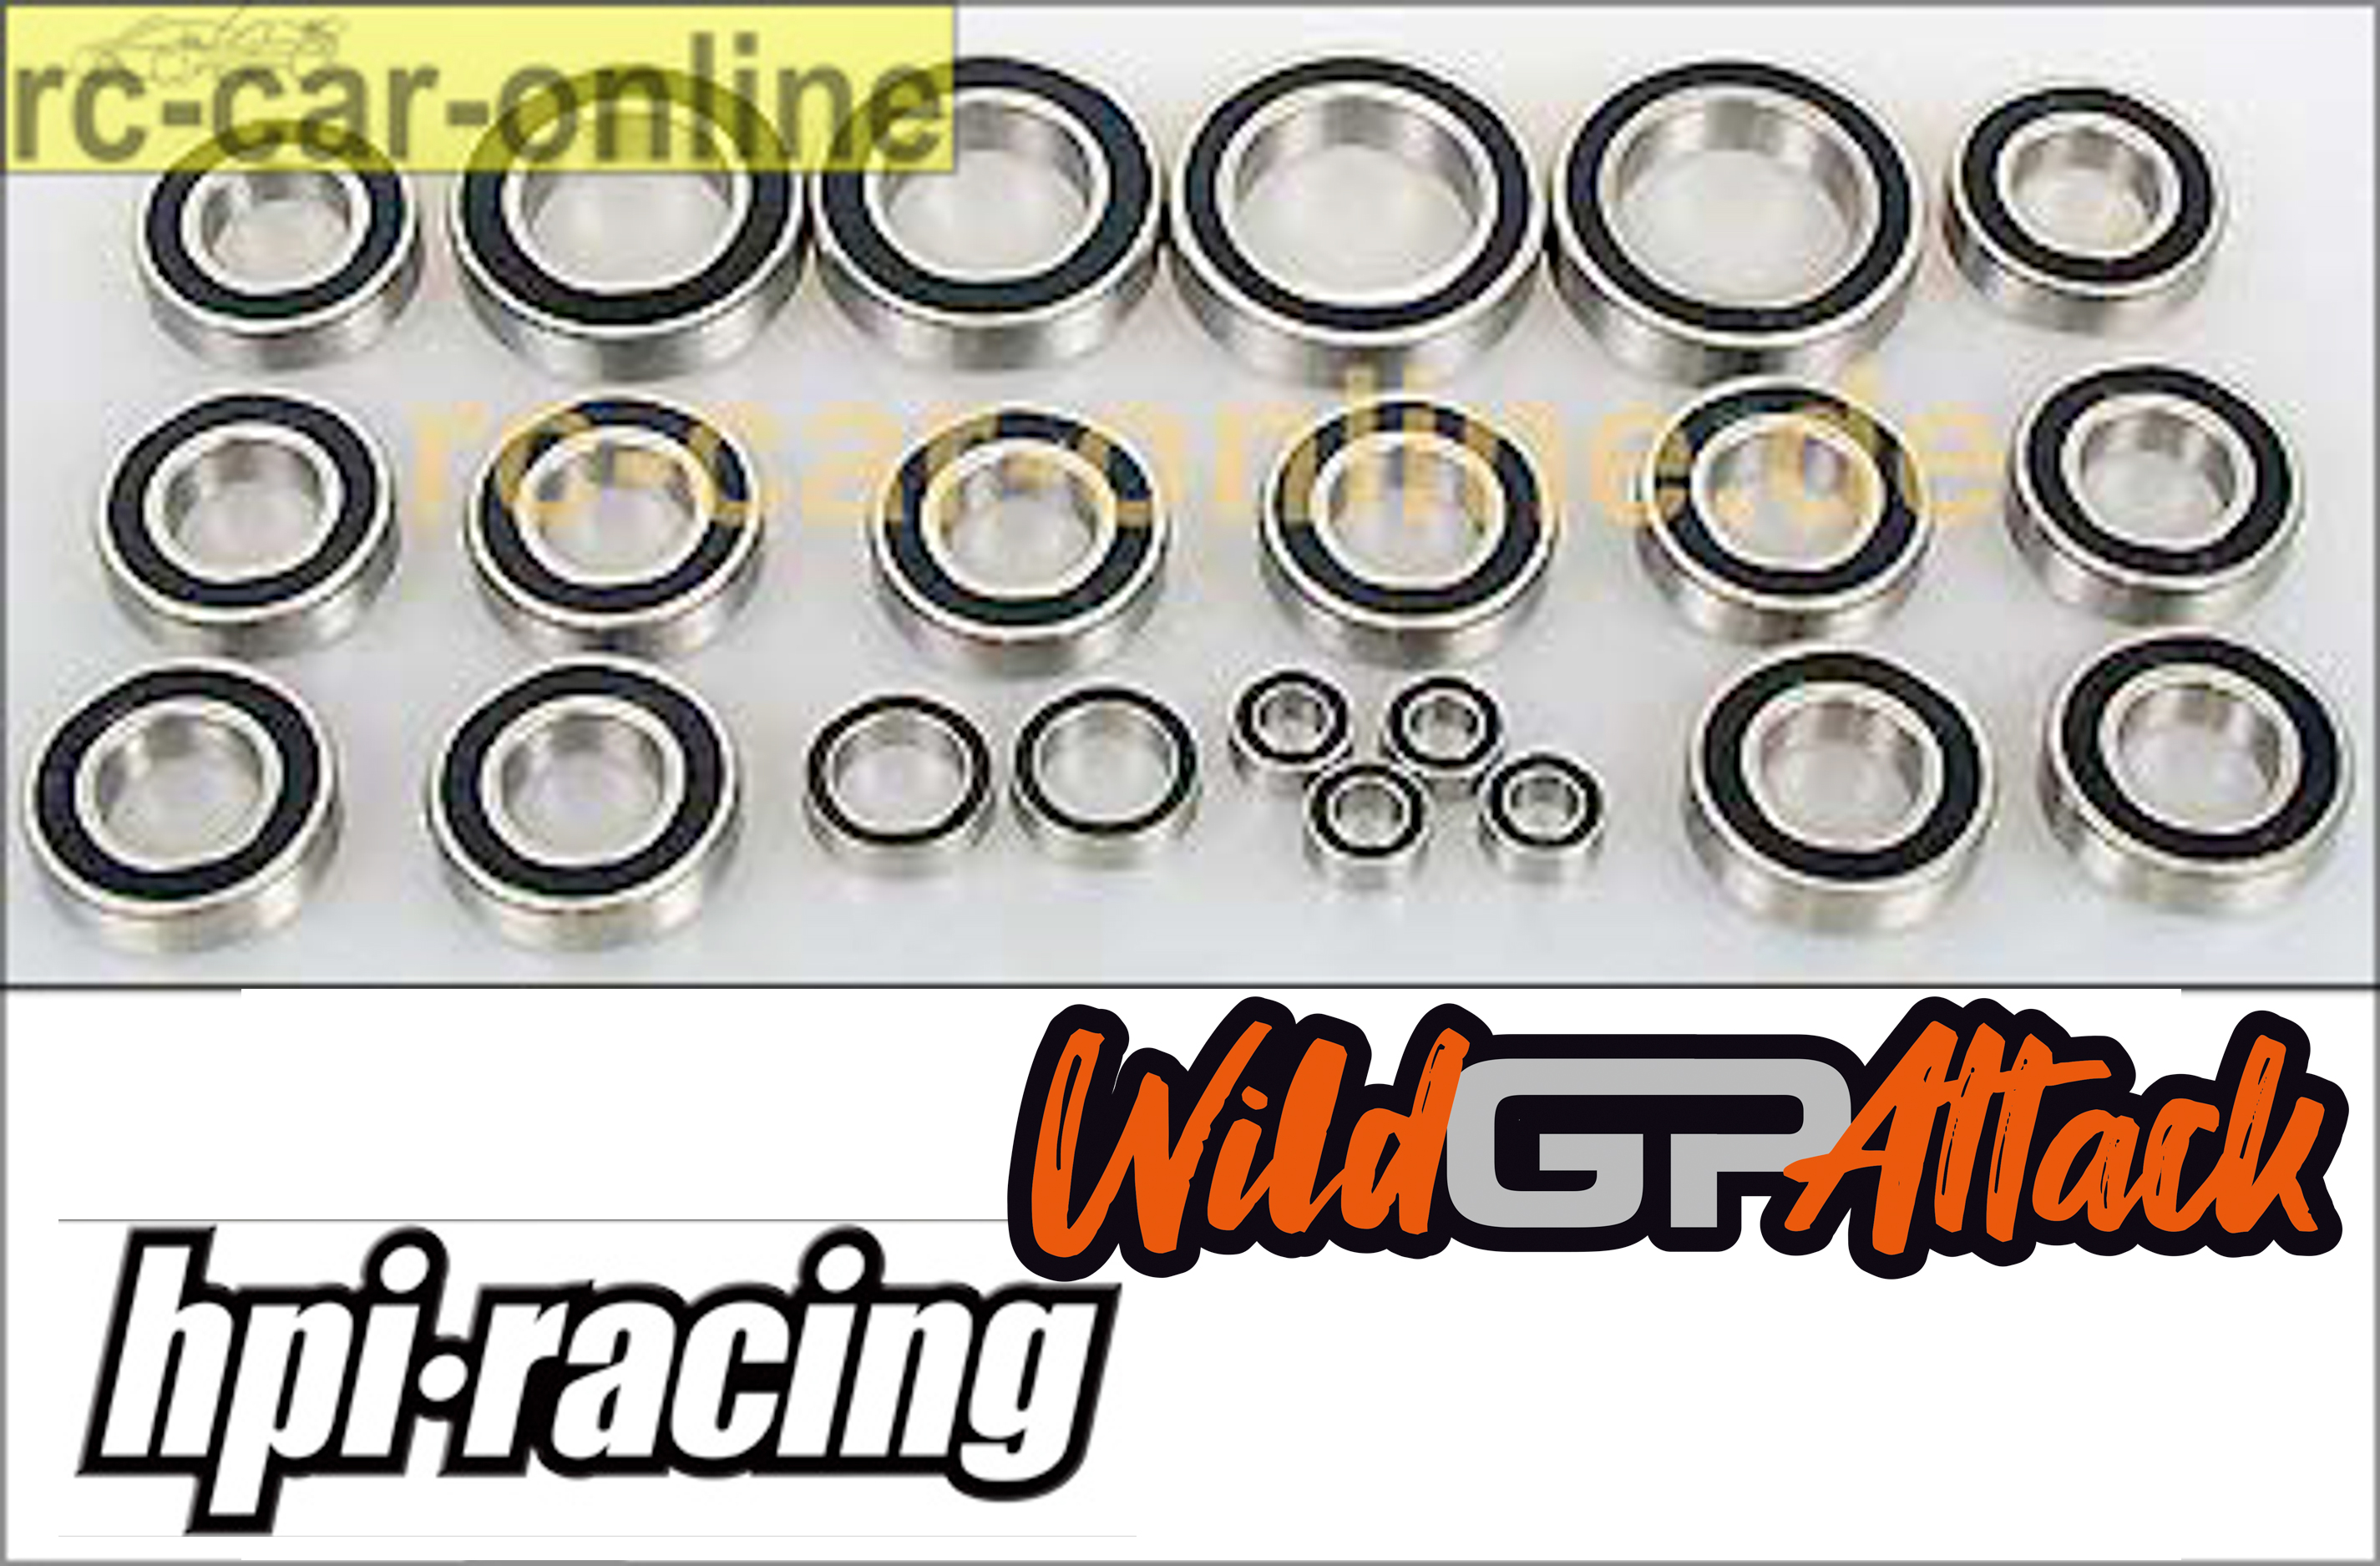 y0230 Ball bearing set for HPI Baja 5B/T,Carson 1:5 Wild GP Attack, sealed